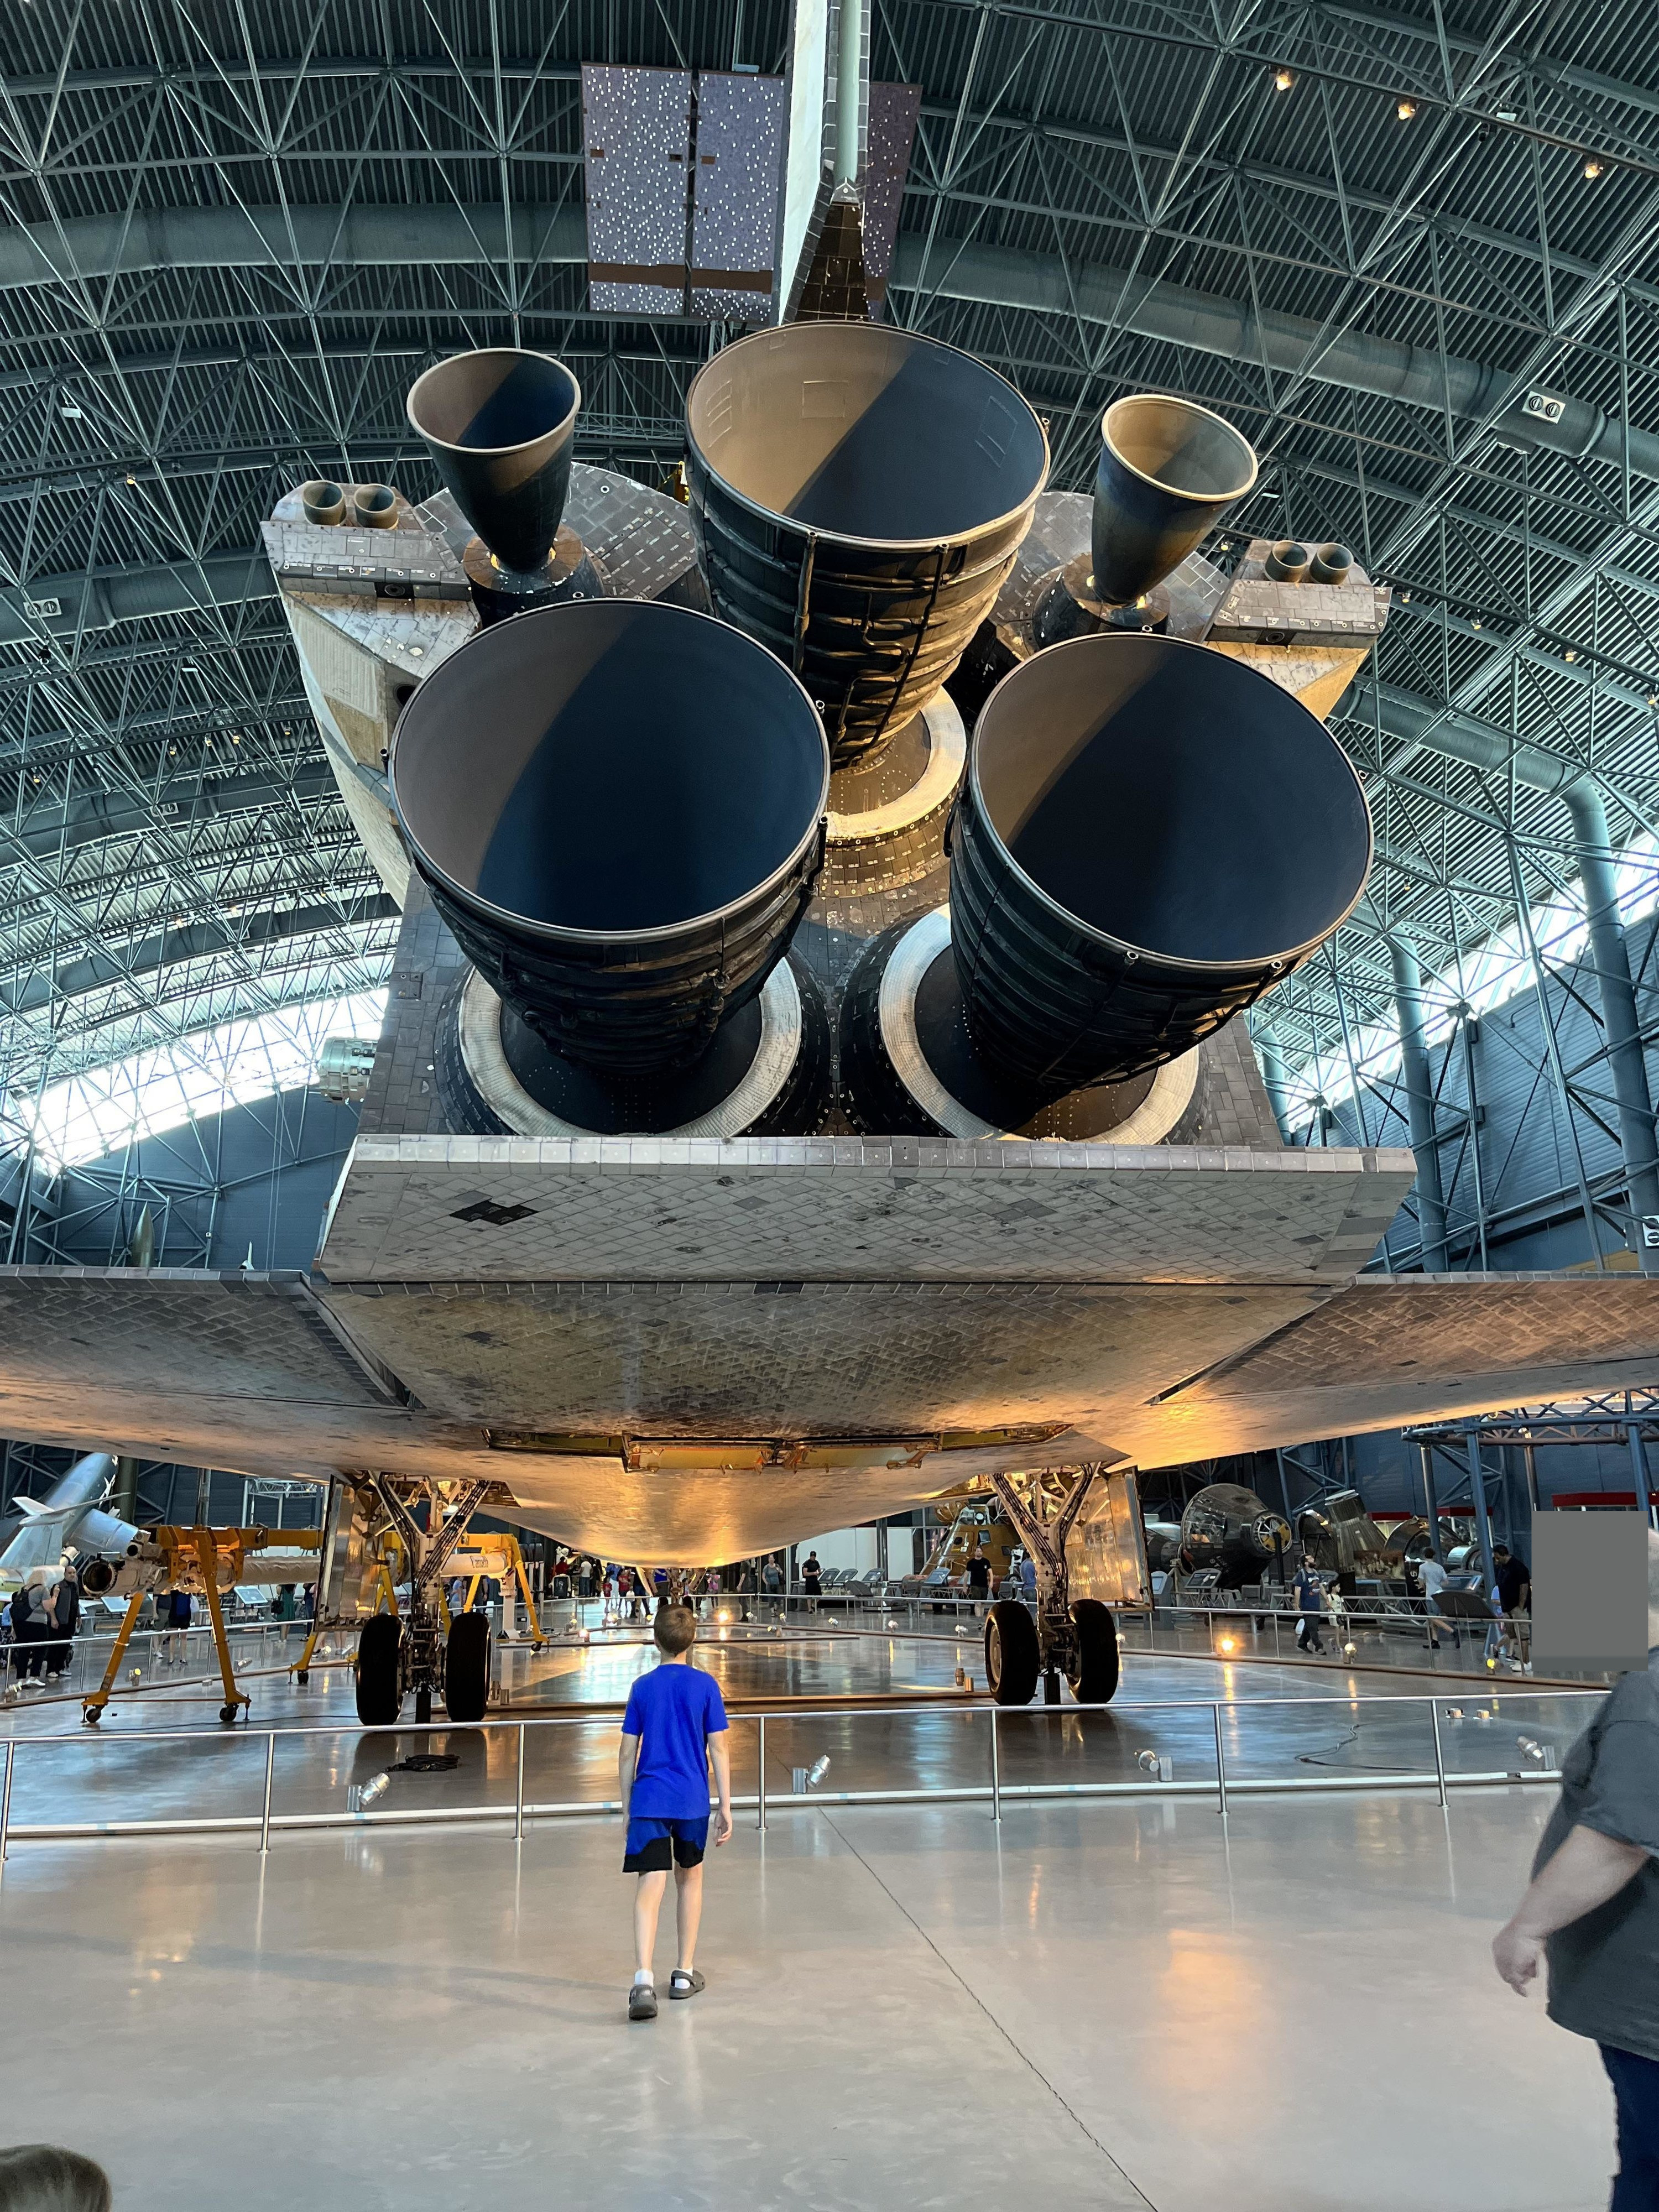 A little boy looking at the Space Shuttle Discovery engines